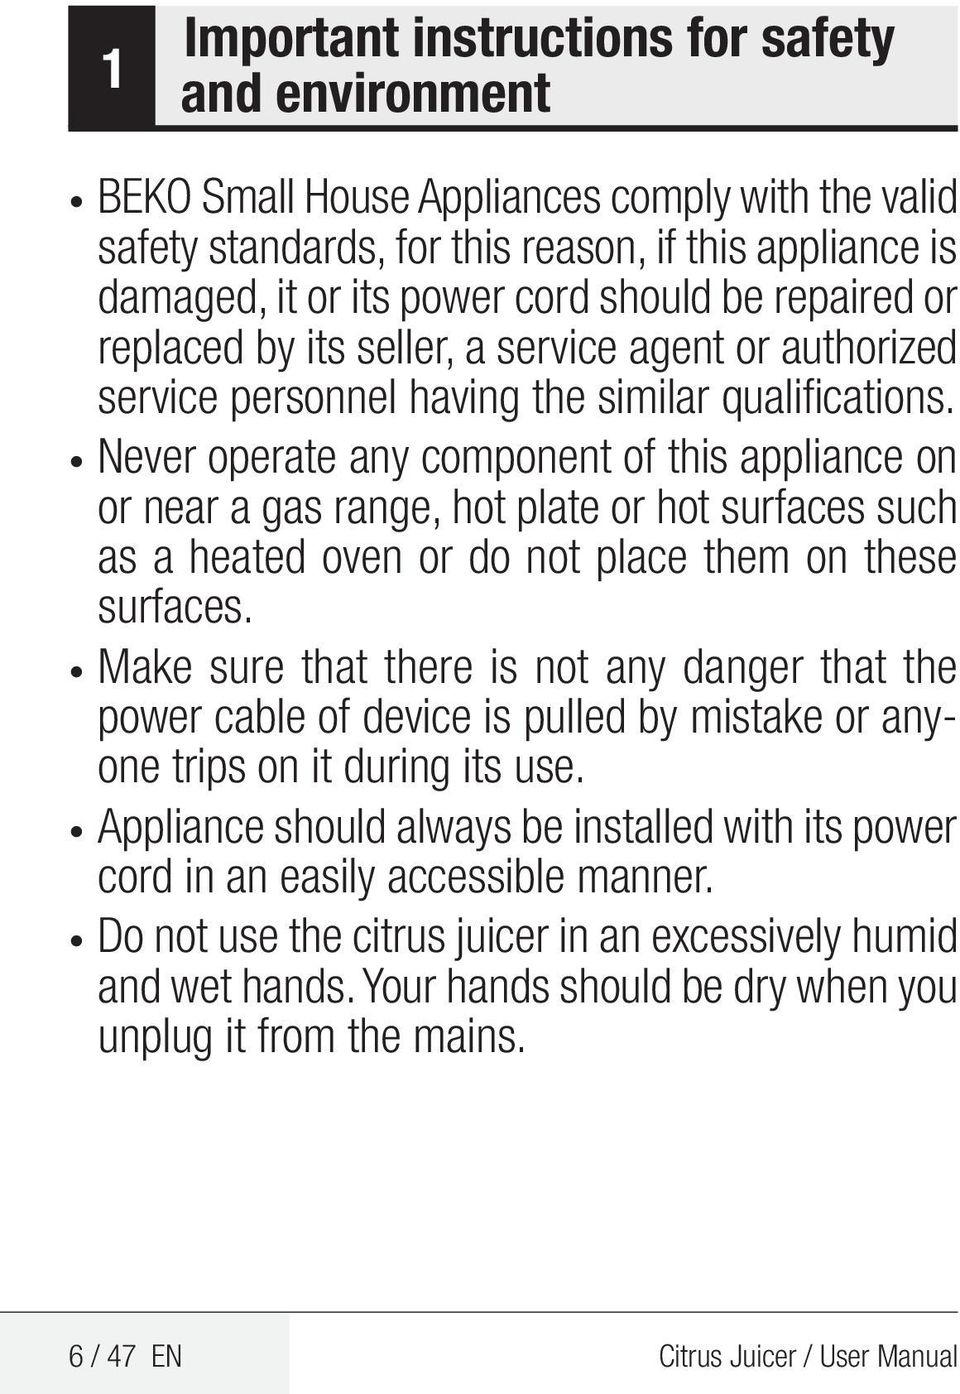 Never operate any component of this appliance on or near a gas range, hot plate or hot surfaces such as a heated oven or do not place them on these surfaces.